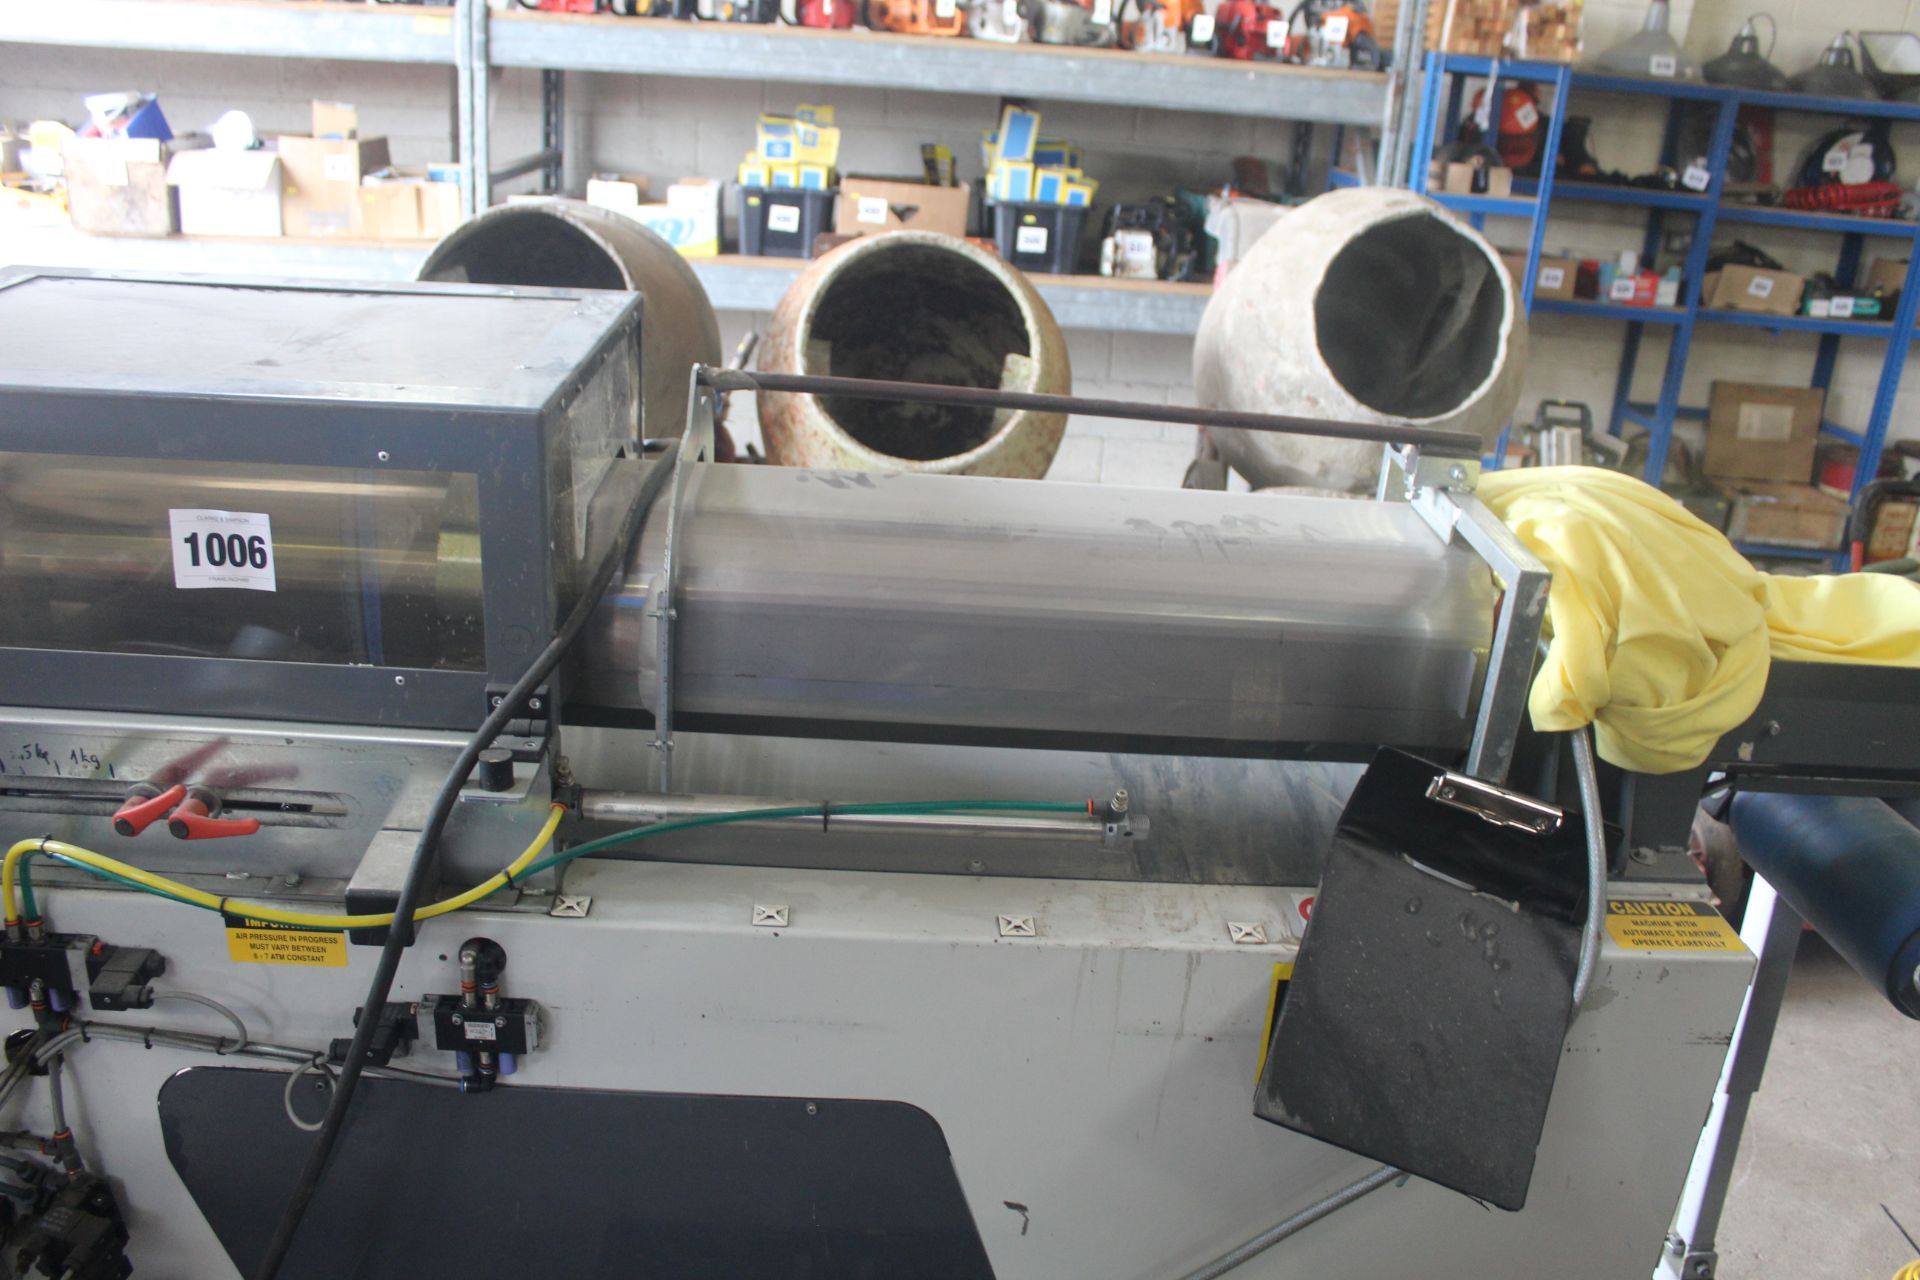 Sorma KB GX 140 produce netting machine. With label printer and output elevator. - Image 3 of 28